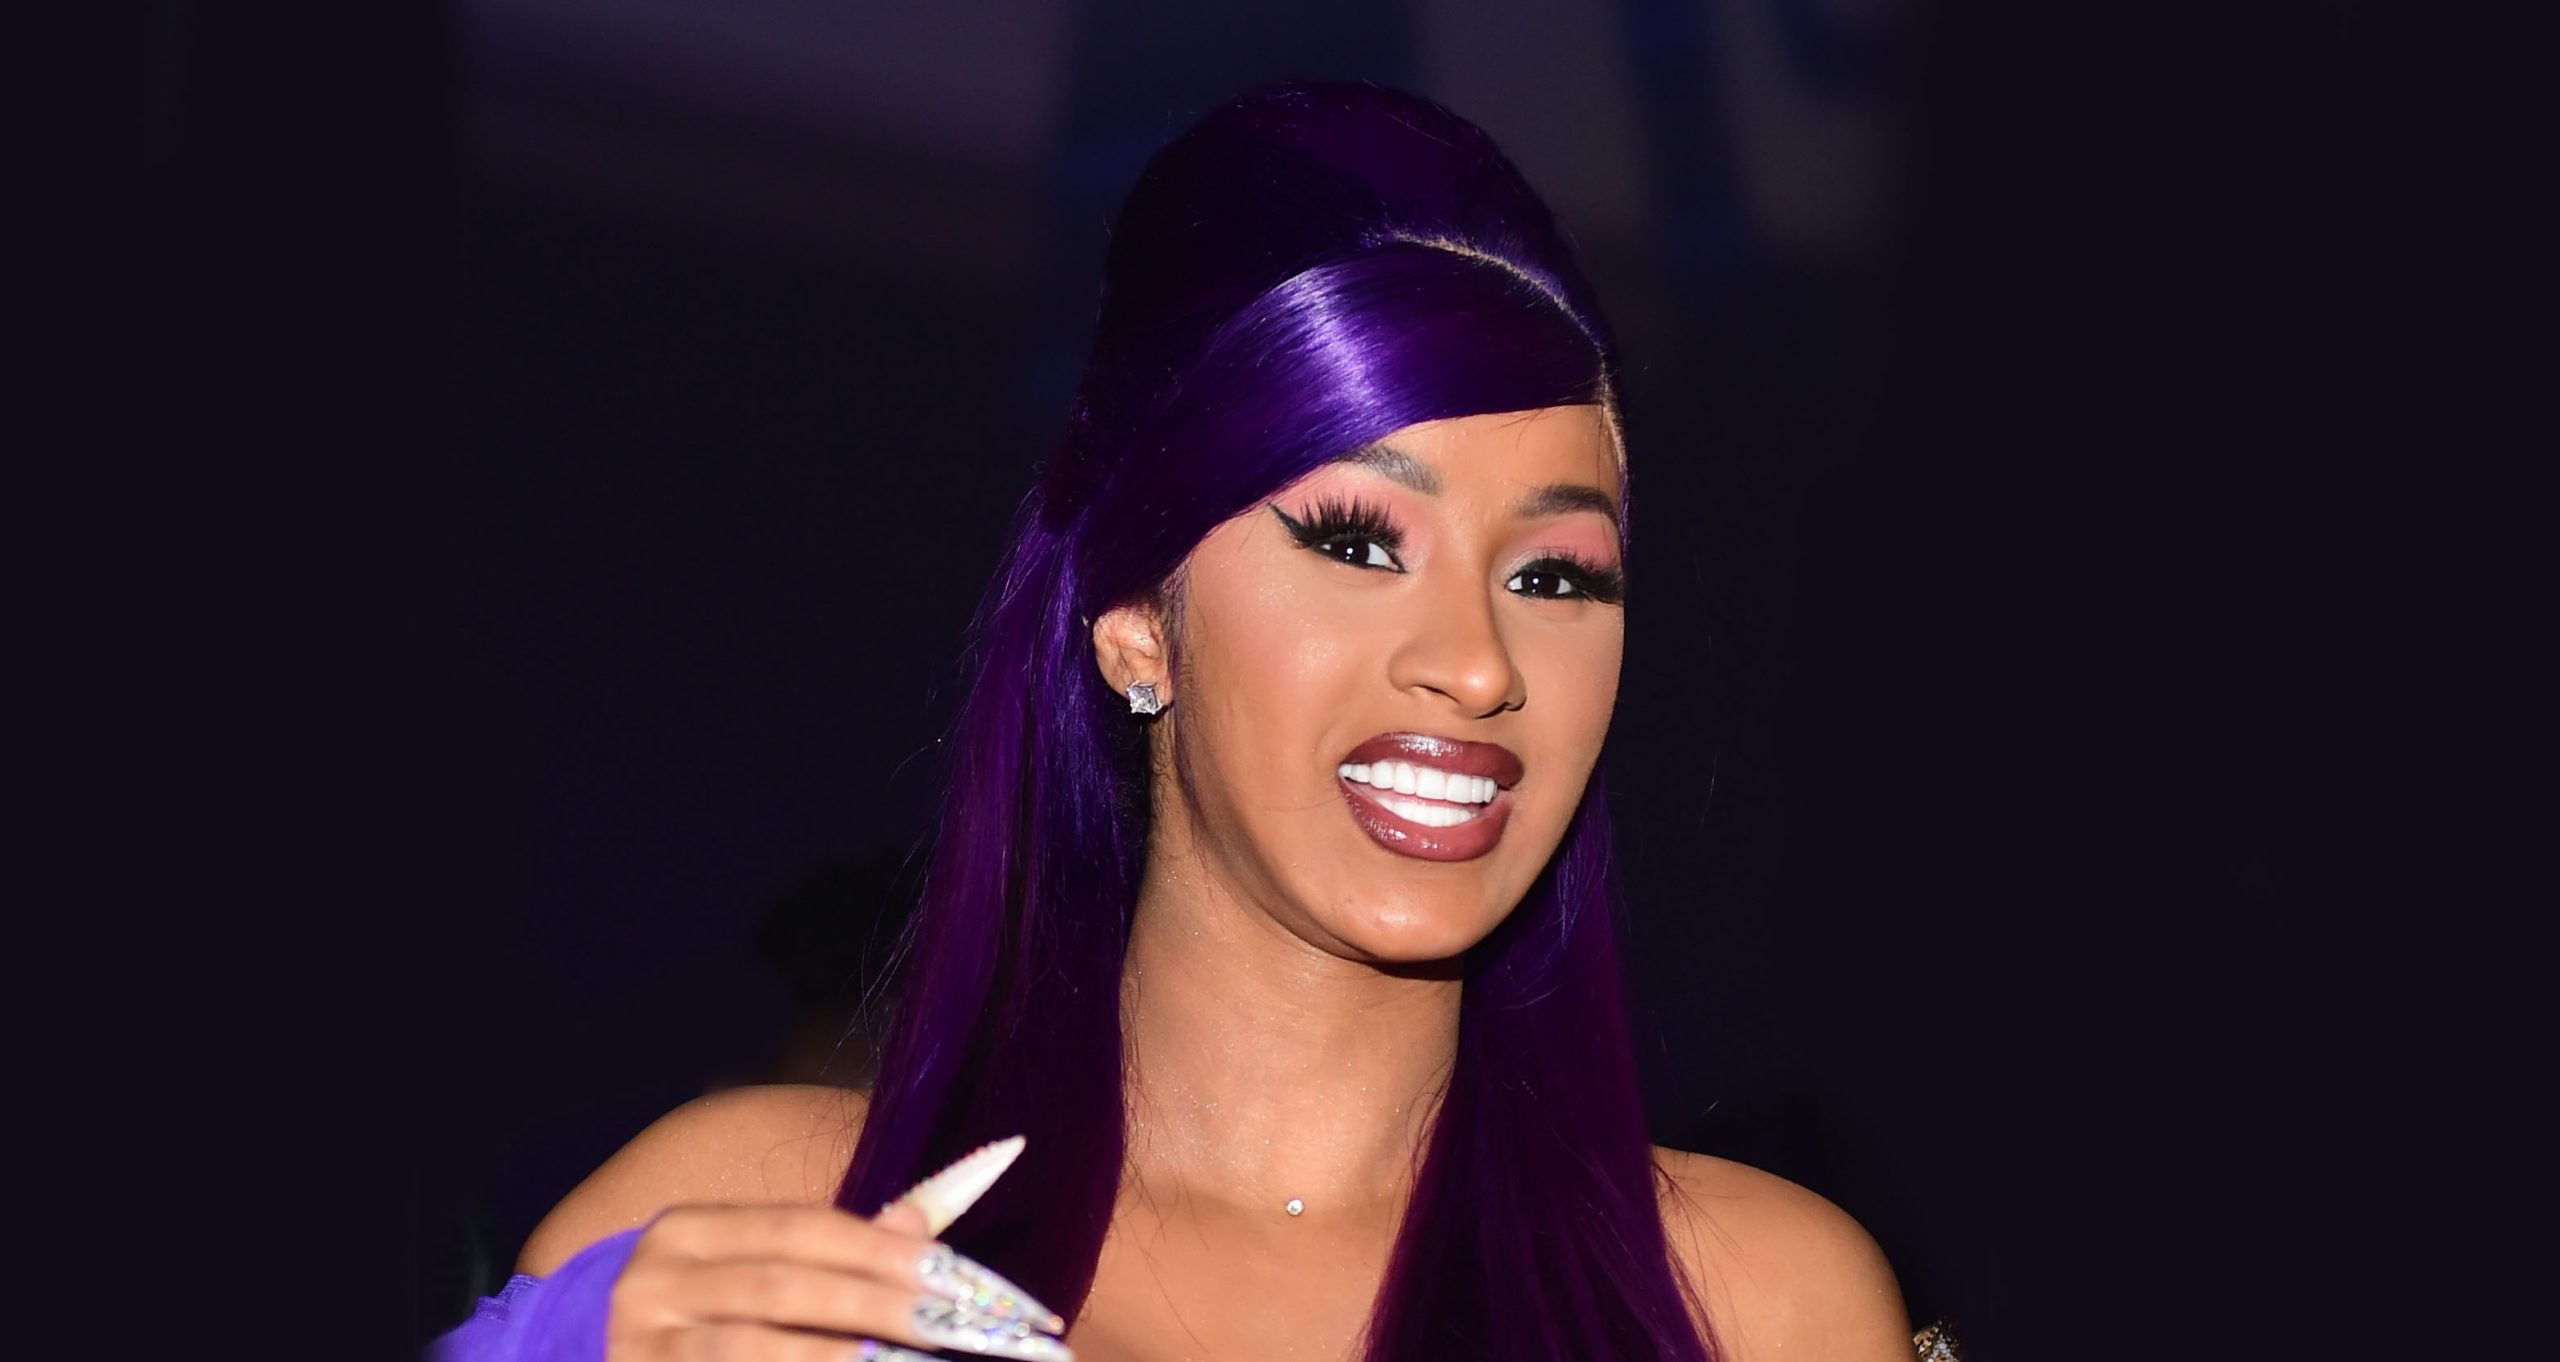 Cardi B Will Appear In Upcoming ‘Fast & Furious 9’ Film